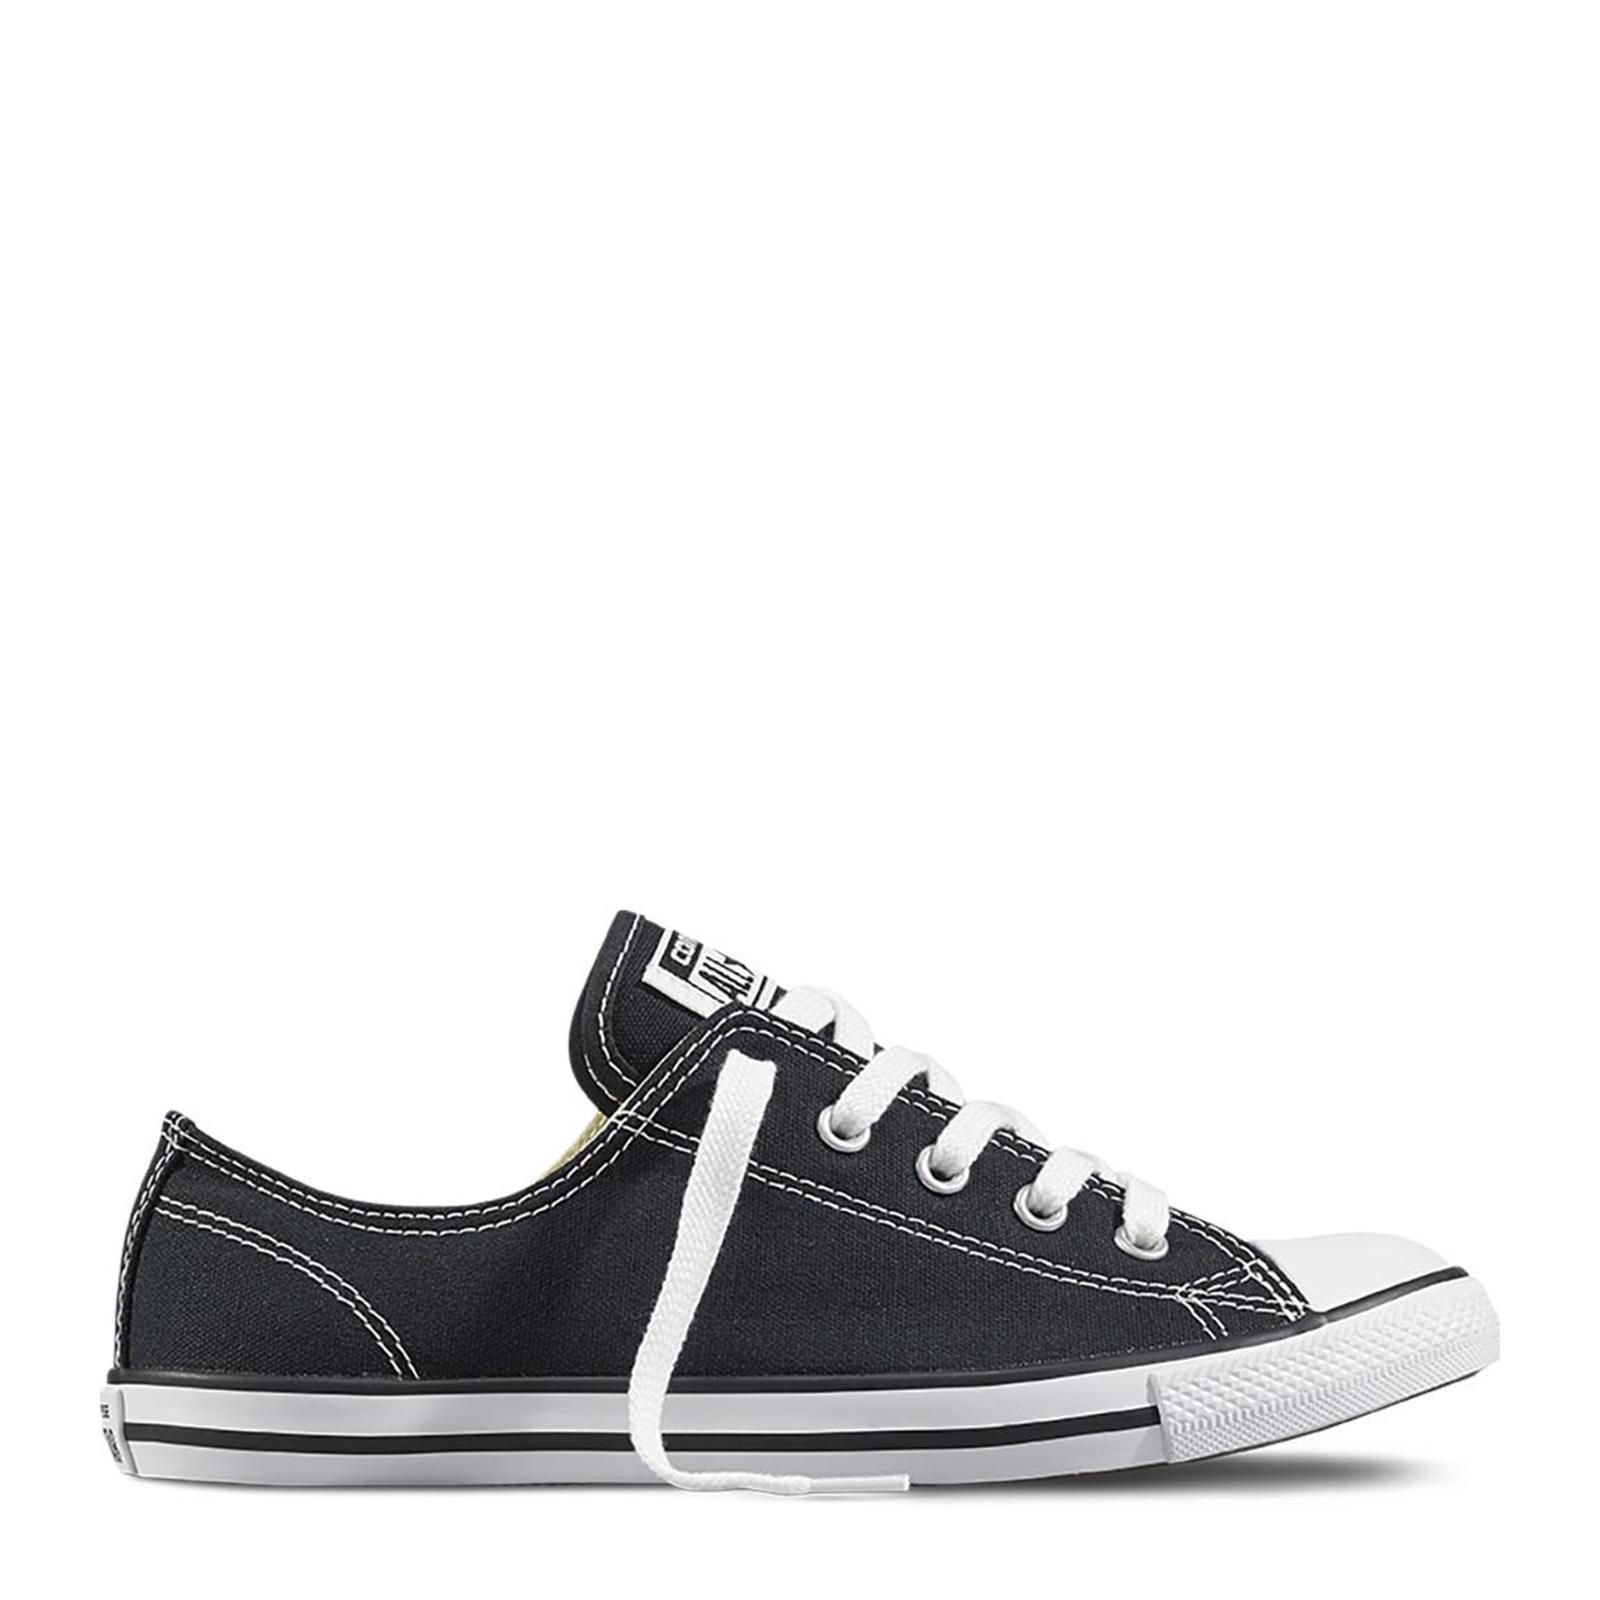 converse all star white leather sale